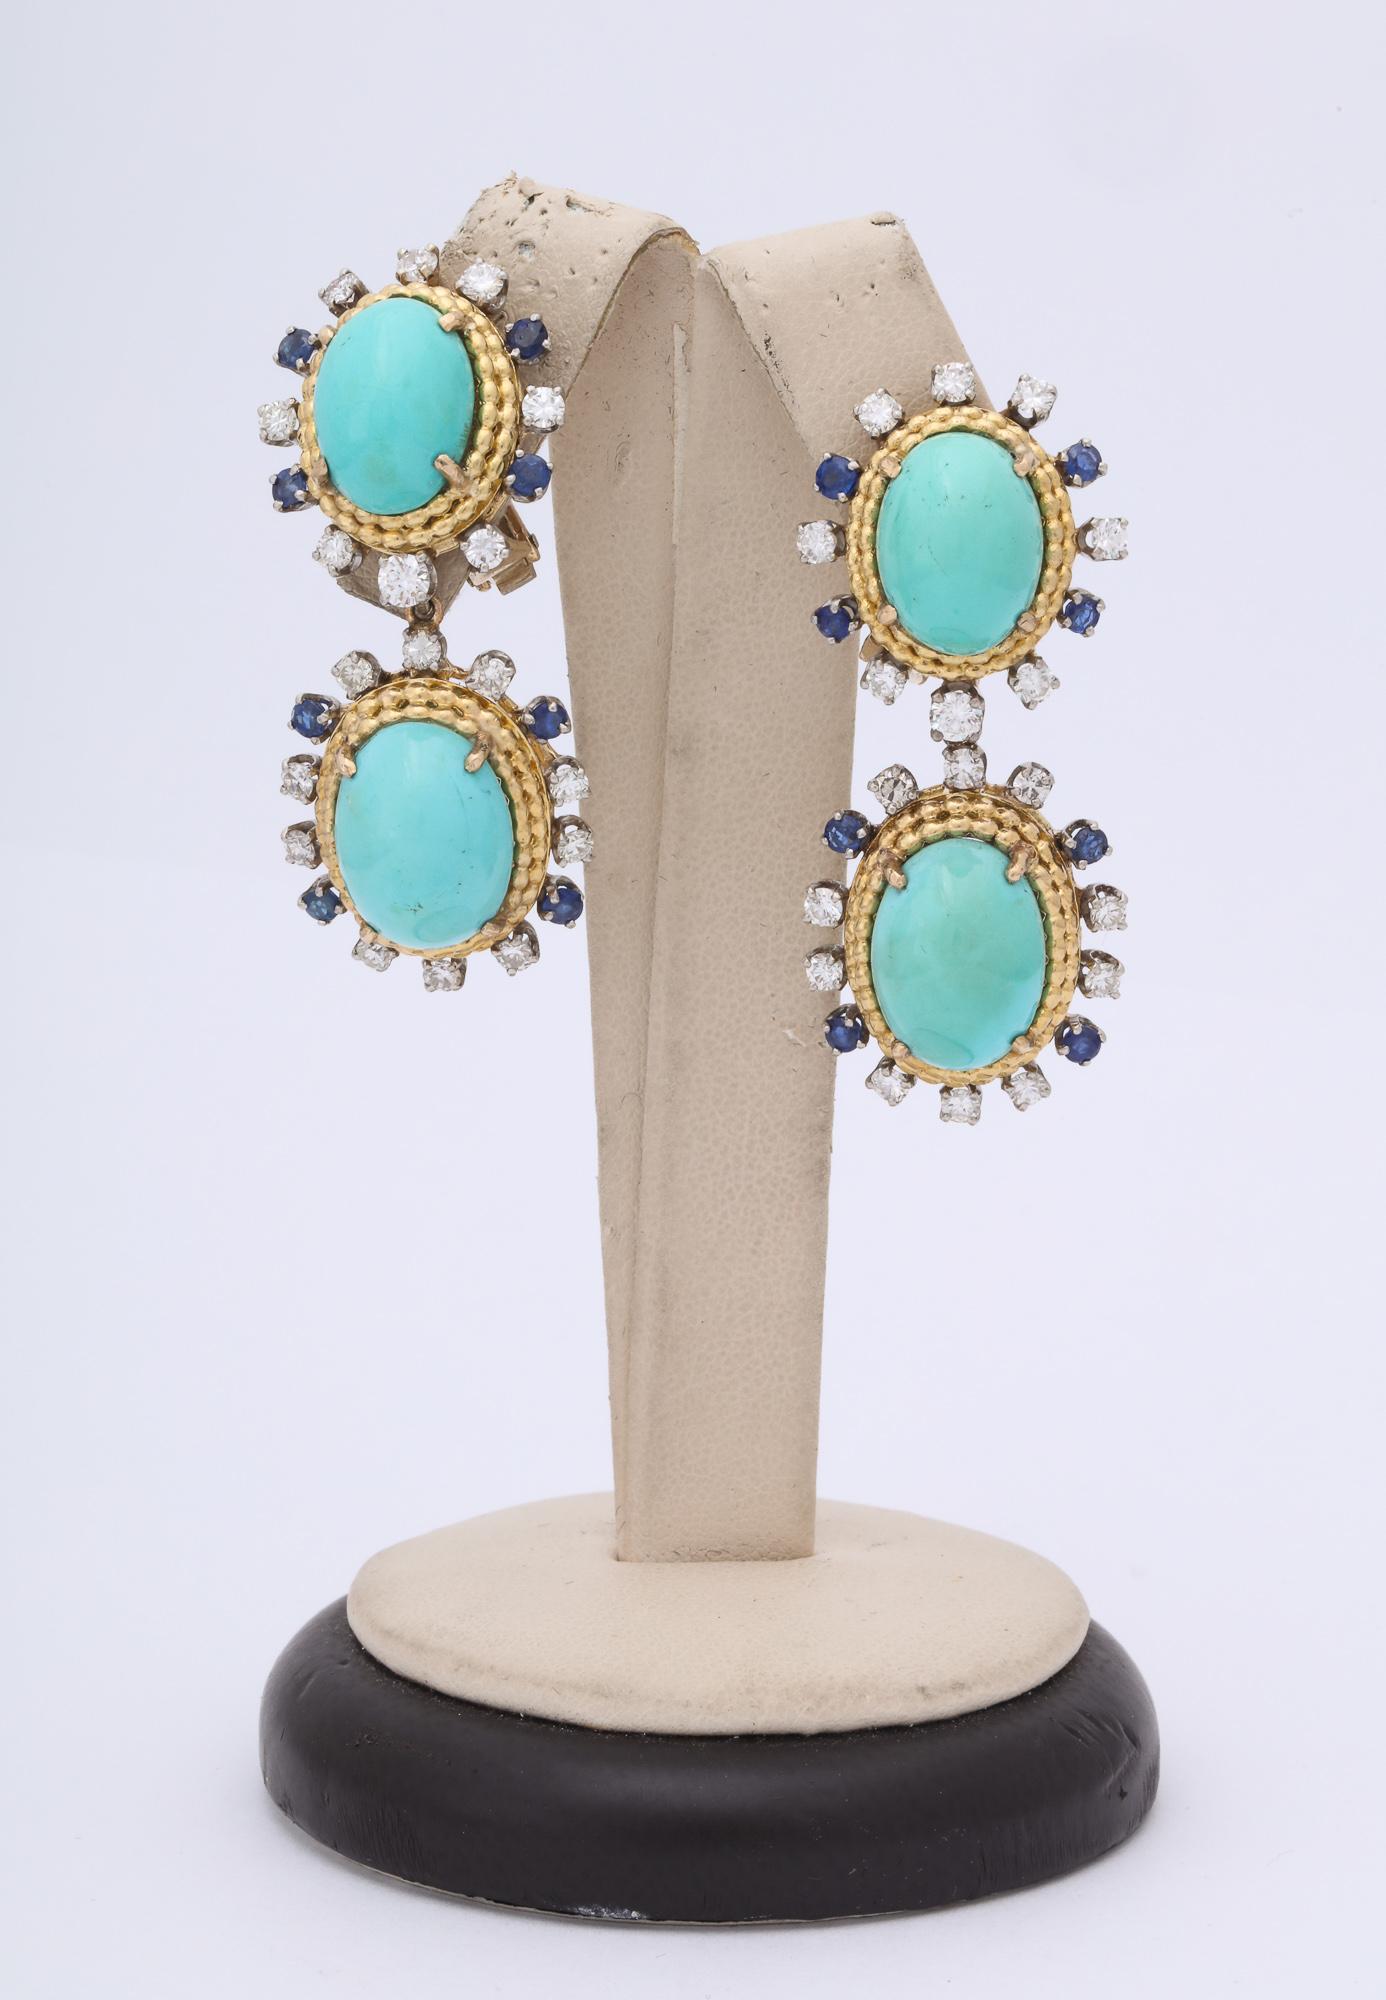 One Pair Of 18kt Yellow Gold Earclips With Fancy Clip On Backs Embellished With Four Oval Shaped Cabochon Cut Turquoise Stones Ranging In Size From 12Mm To 15MM . Earrings Are Further Designed With Thirty Six Full Cut Brilliant Cut Diamonds Weighing